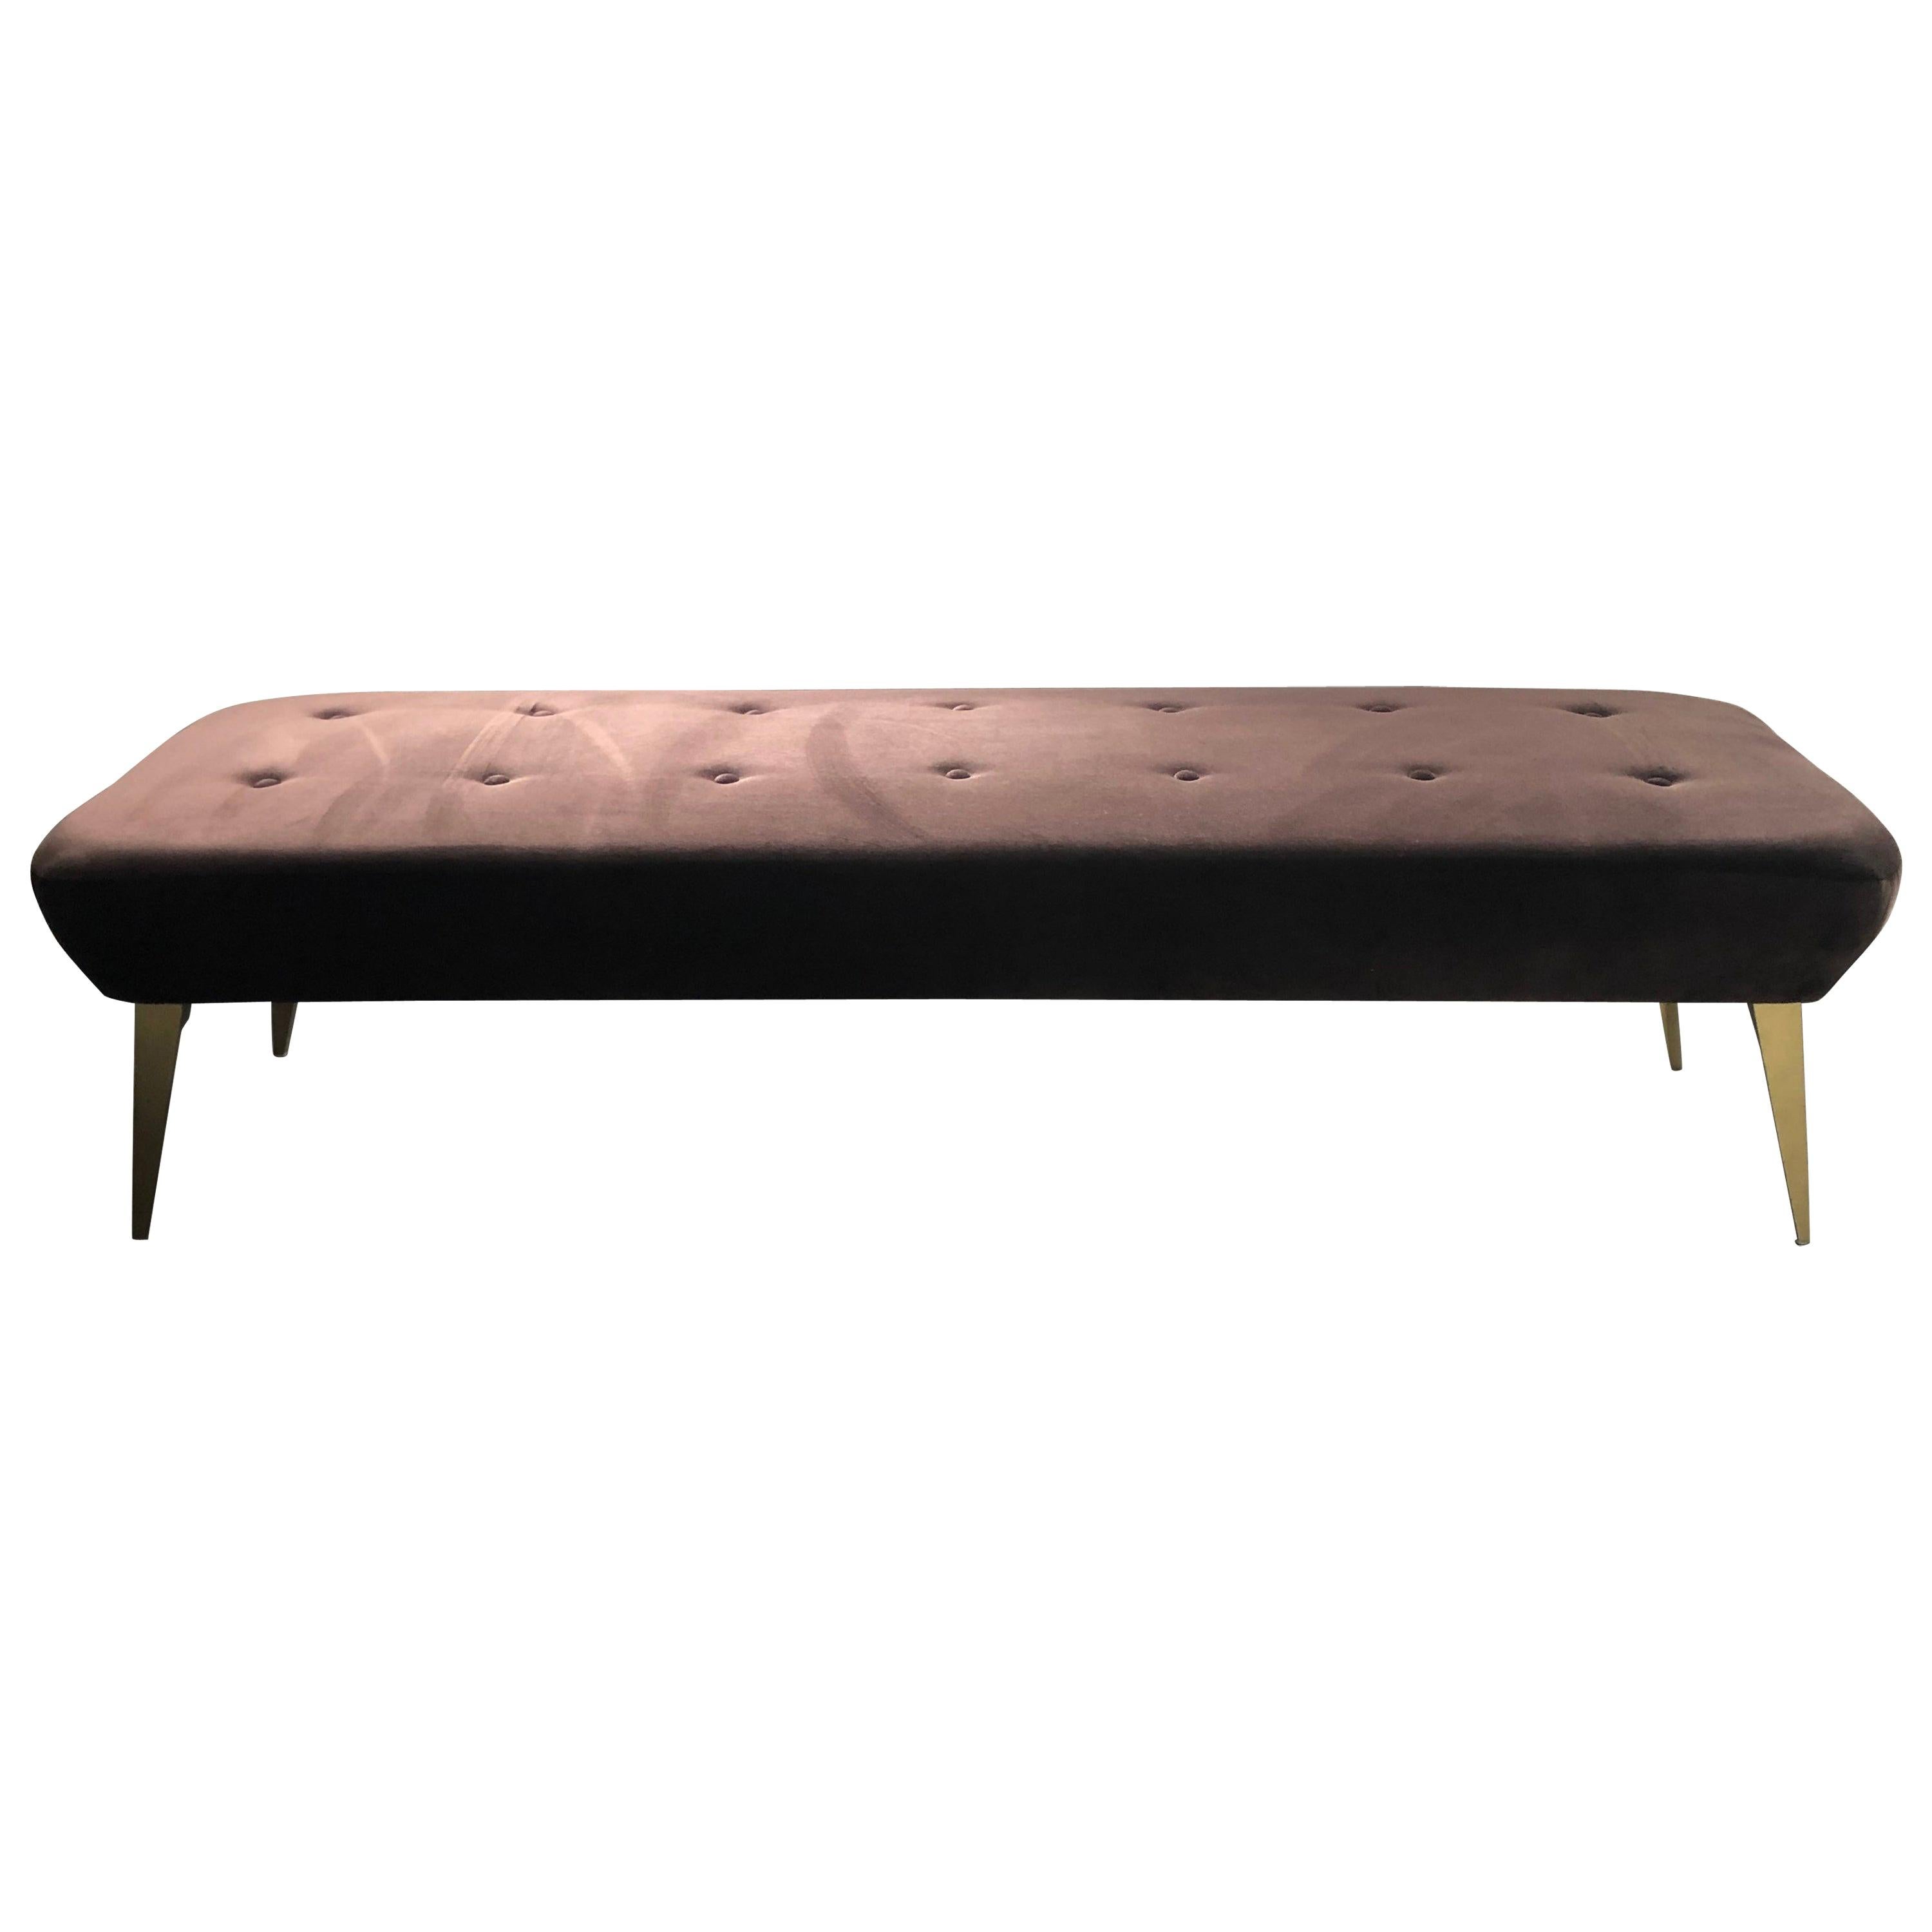 Bench in a Rich Brown, Buttoned Velvet Adorned with Gold Lacquered Feet